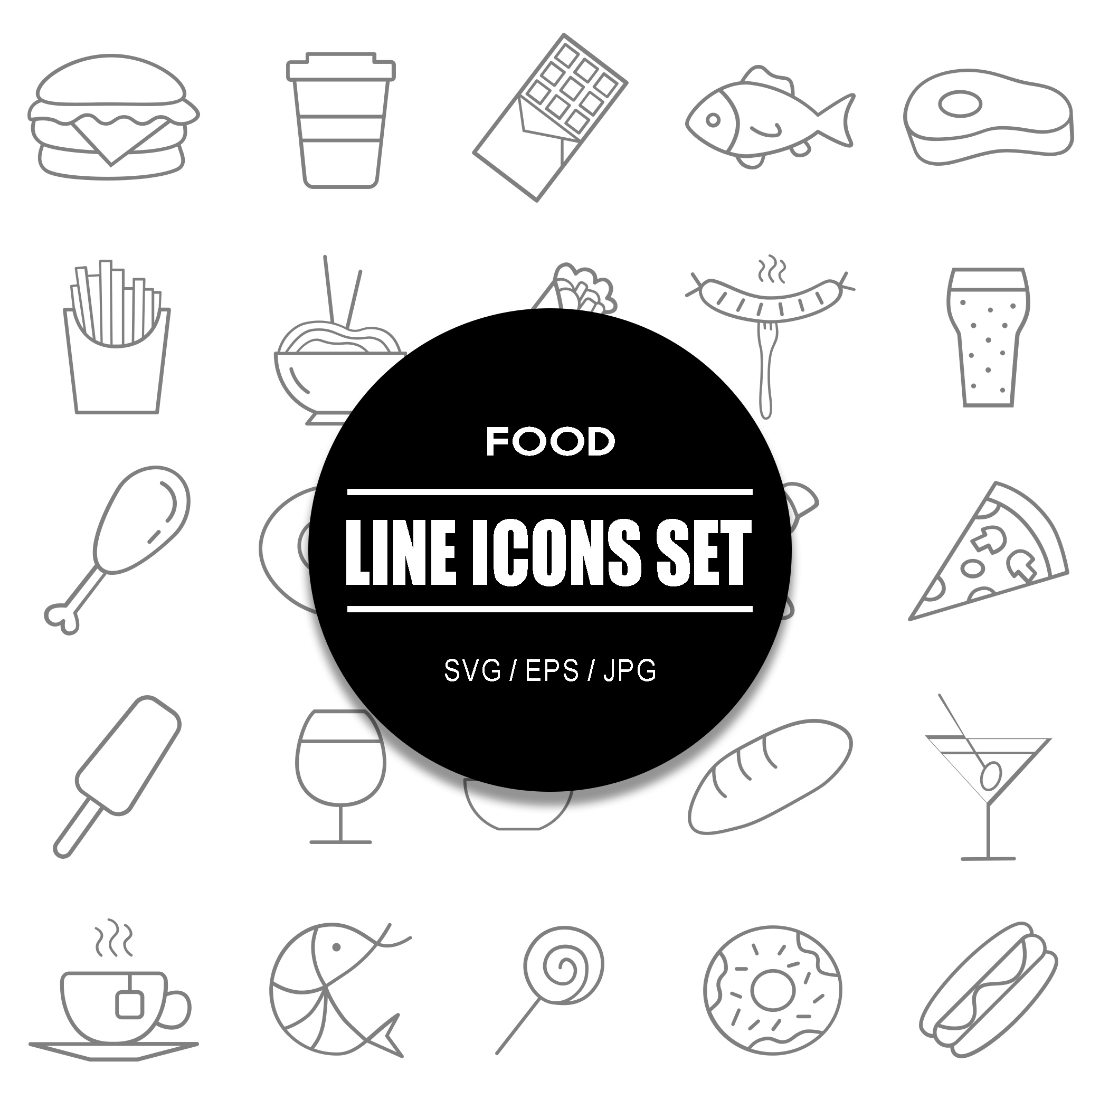 Food Line Icon Set cover image.